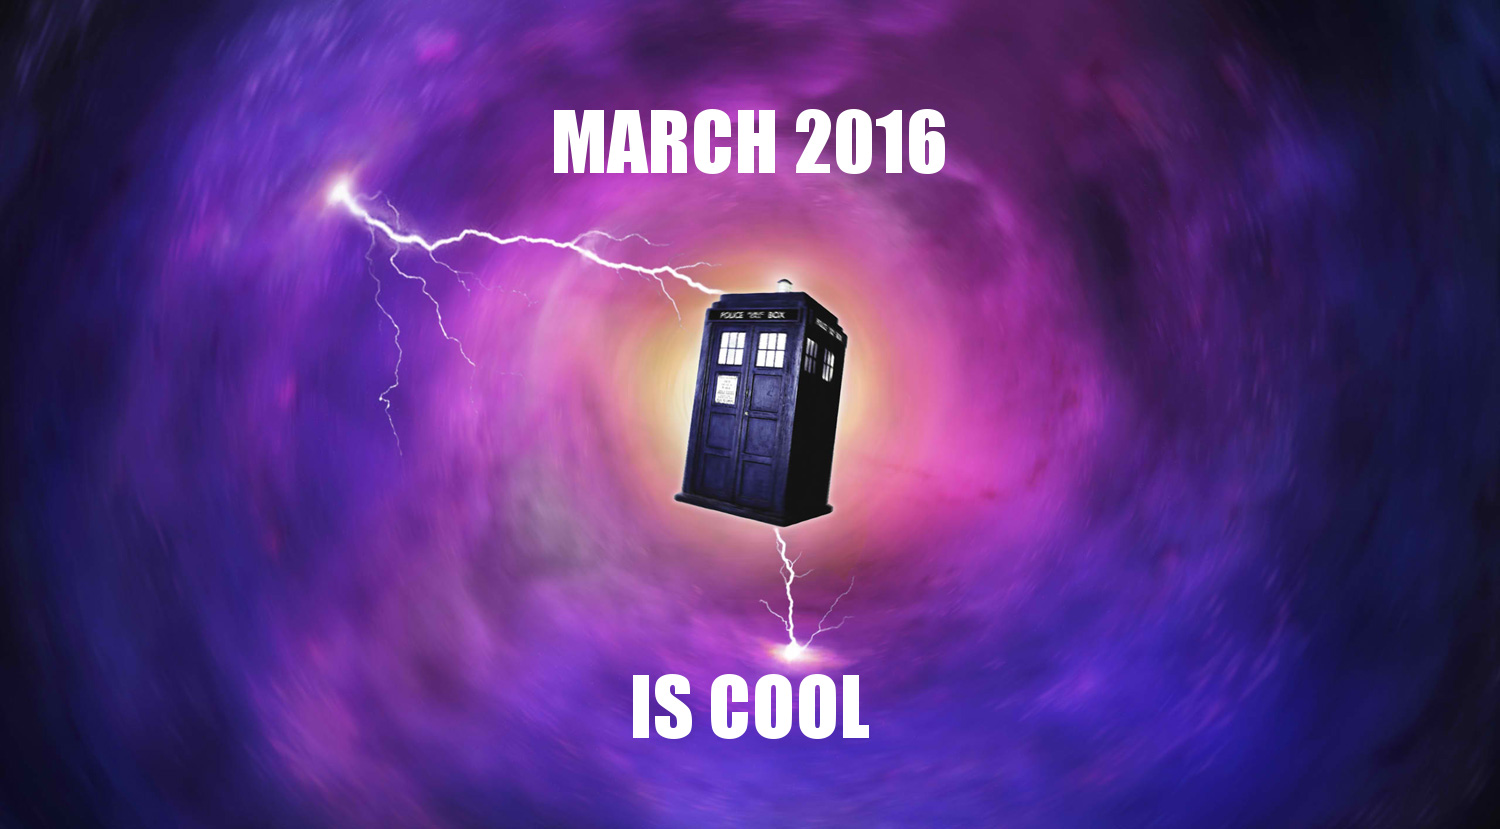 March 2016 is cool